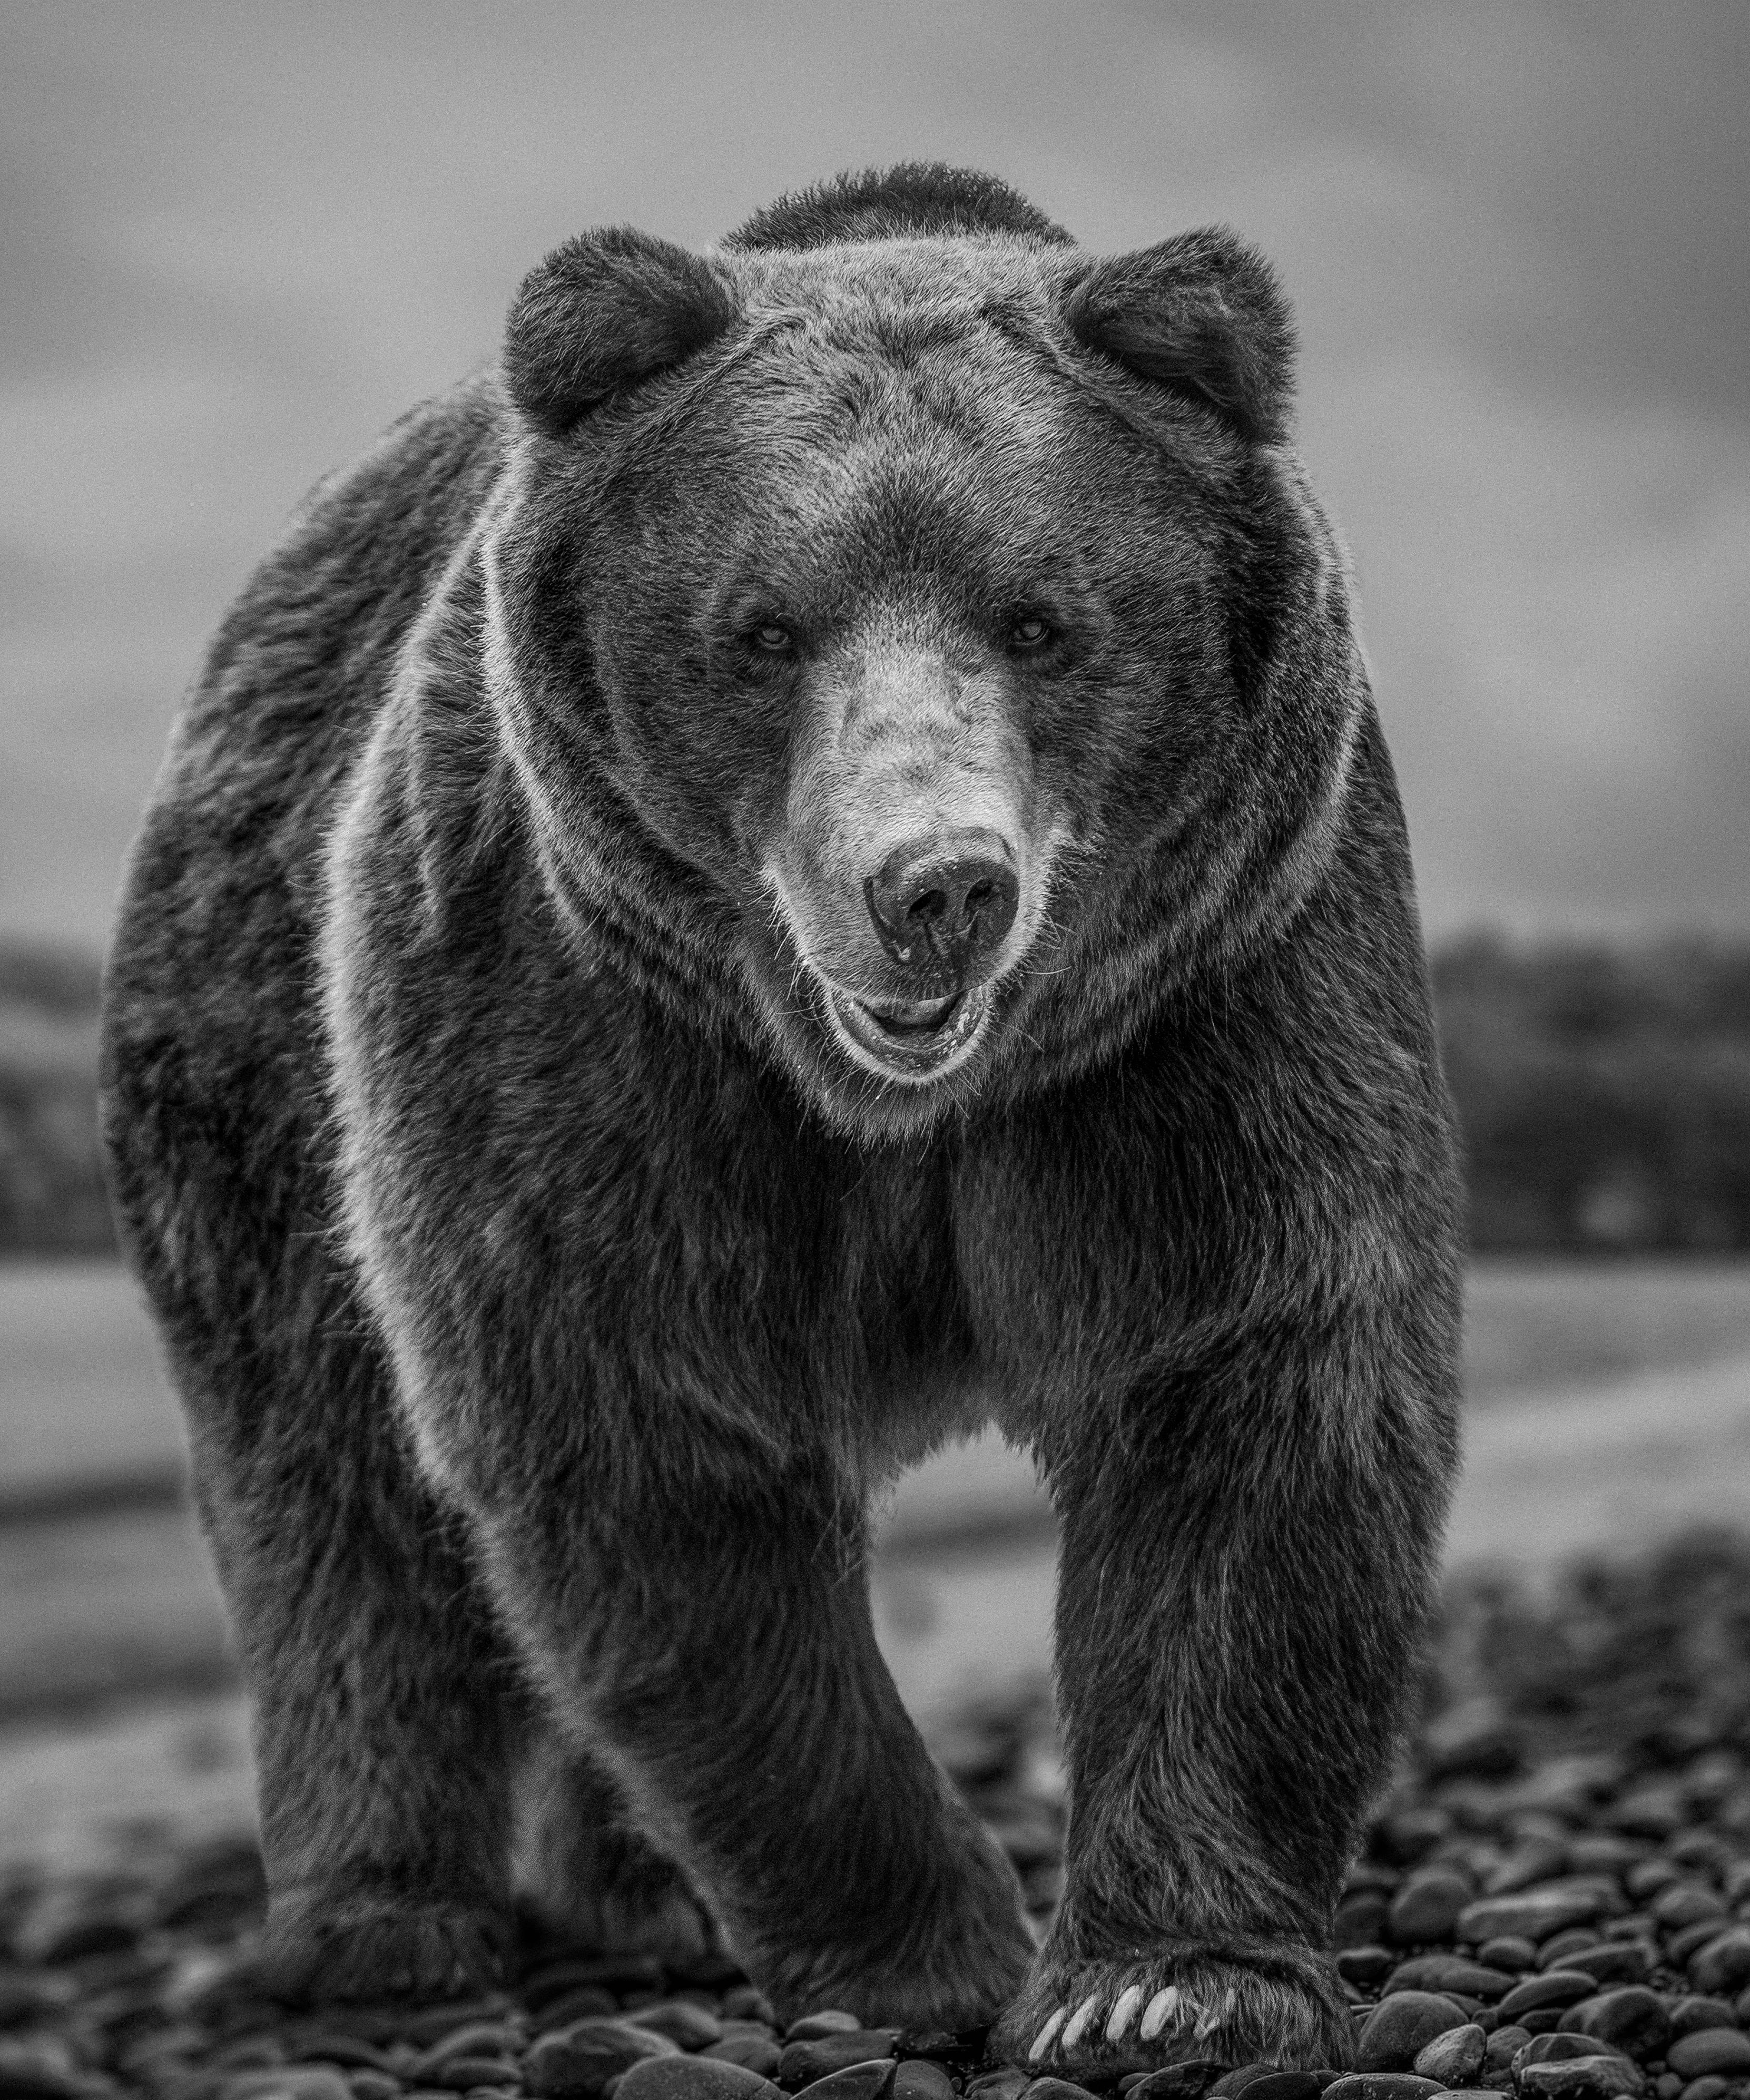 Shane Russeck Black and White Photograph - Bear Beach 36x48  Black & White Photography, Grizzly Bear Wildlife Photograph